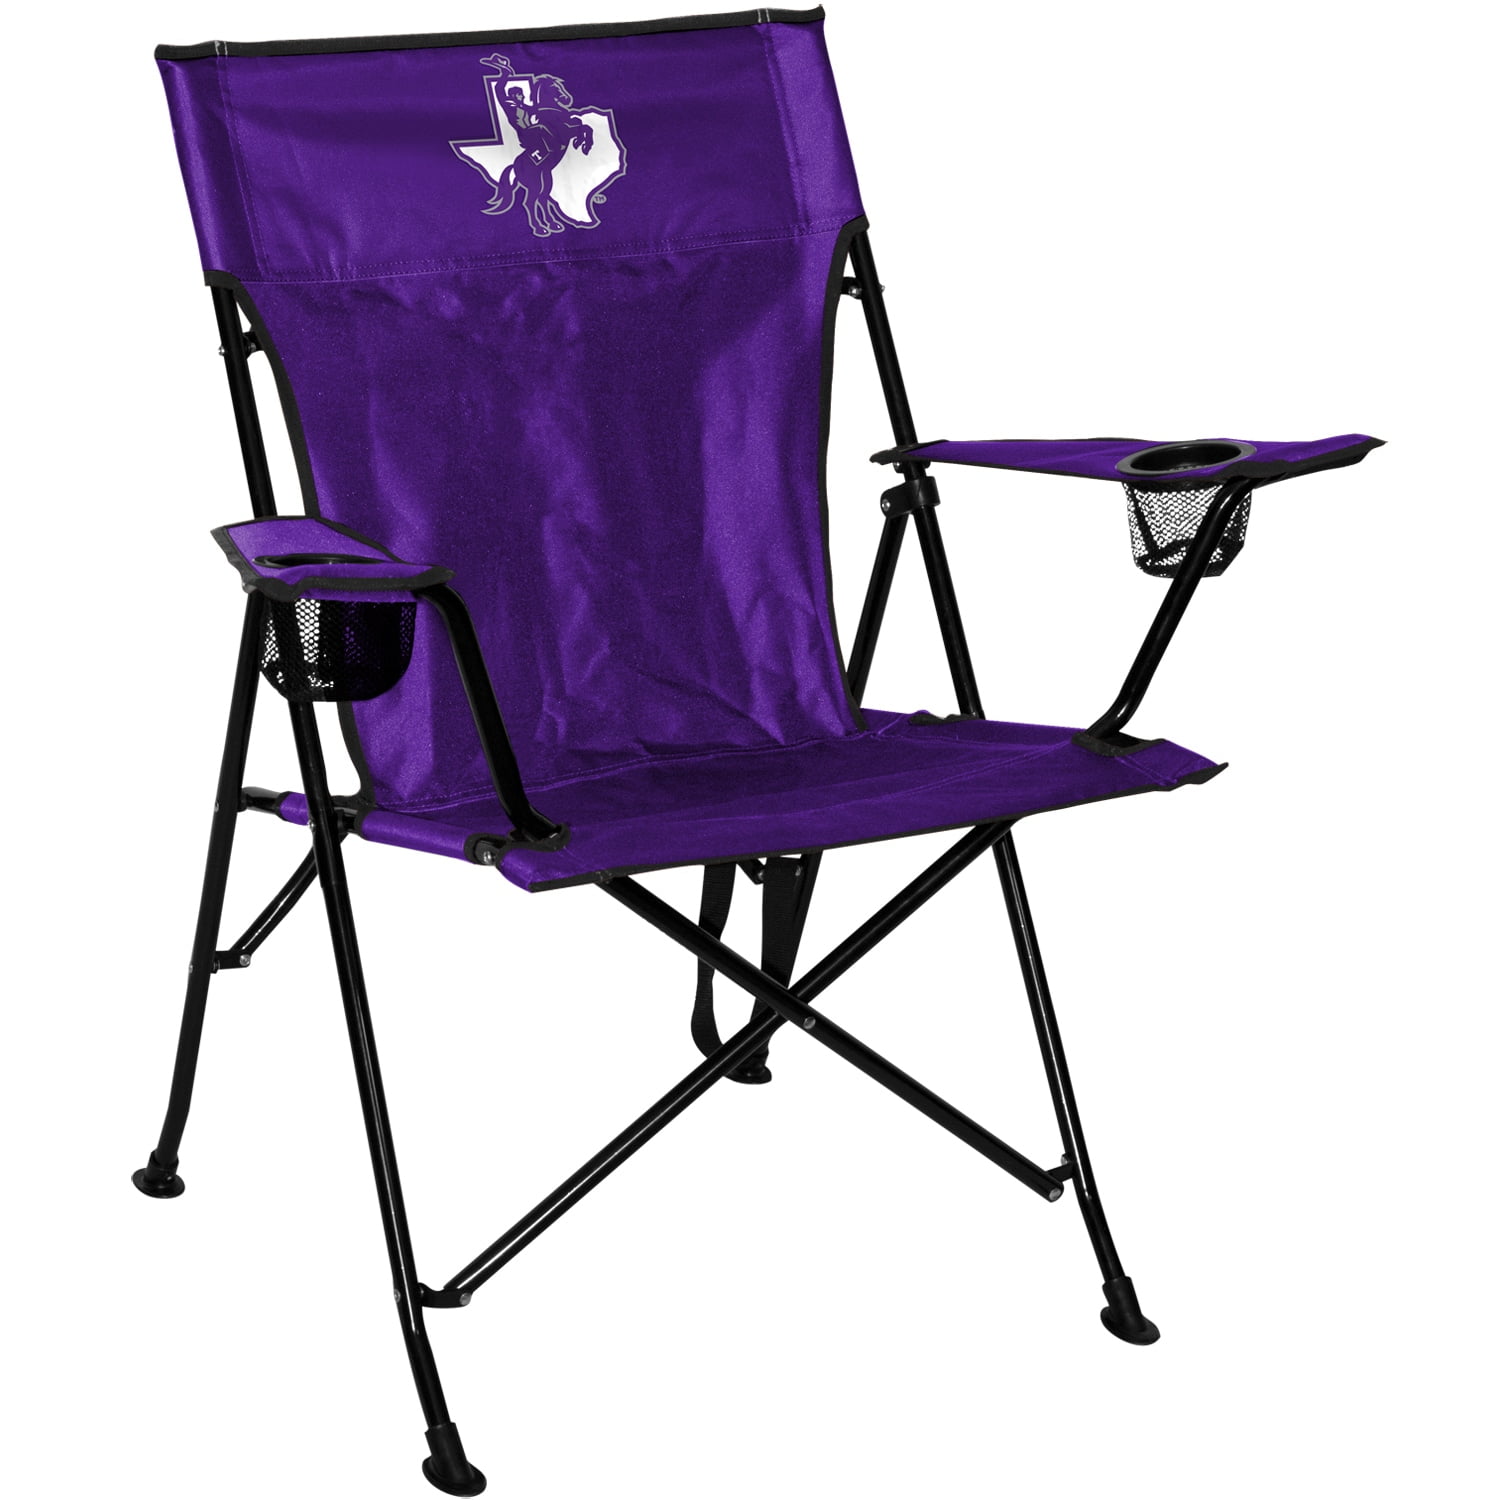 Arkansas State CLC Rawlings NCAA 4.0 Folding Tailgating & Camping Chair with Carry Case 